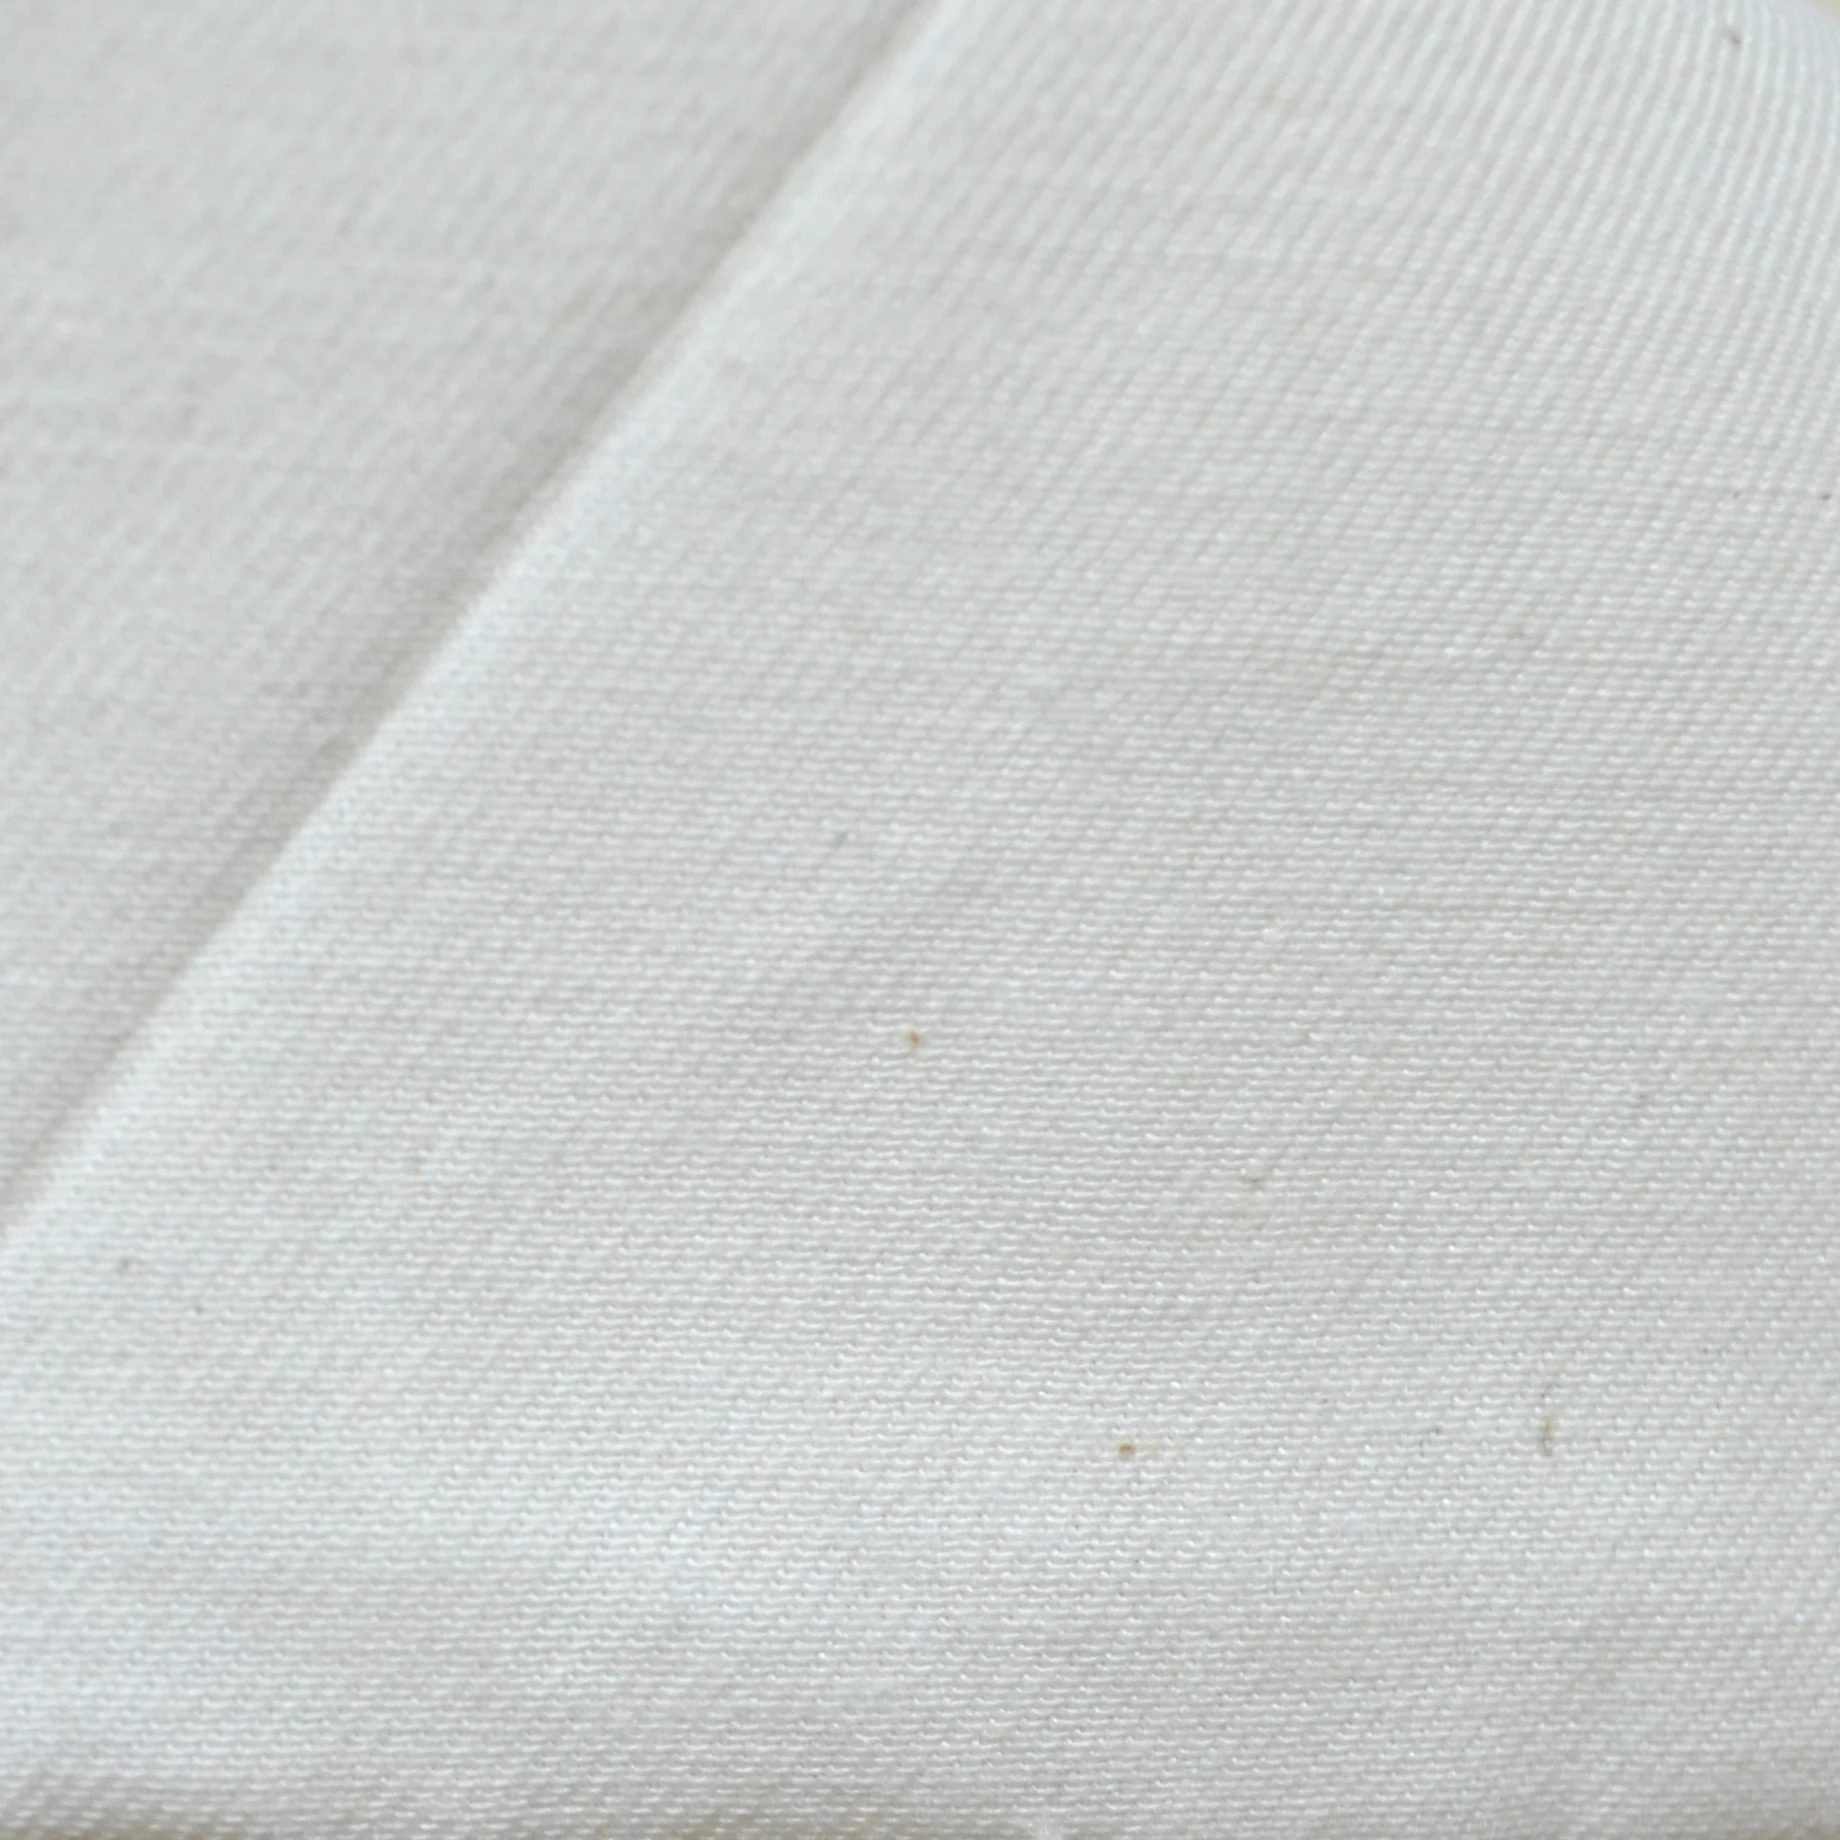 Polyester cotton greige tc grey woven pocketing fabric